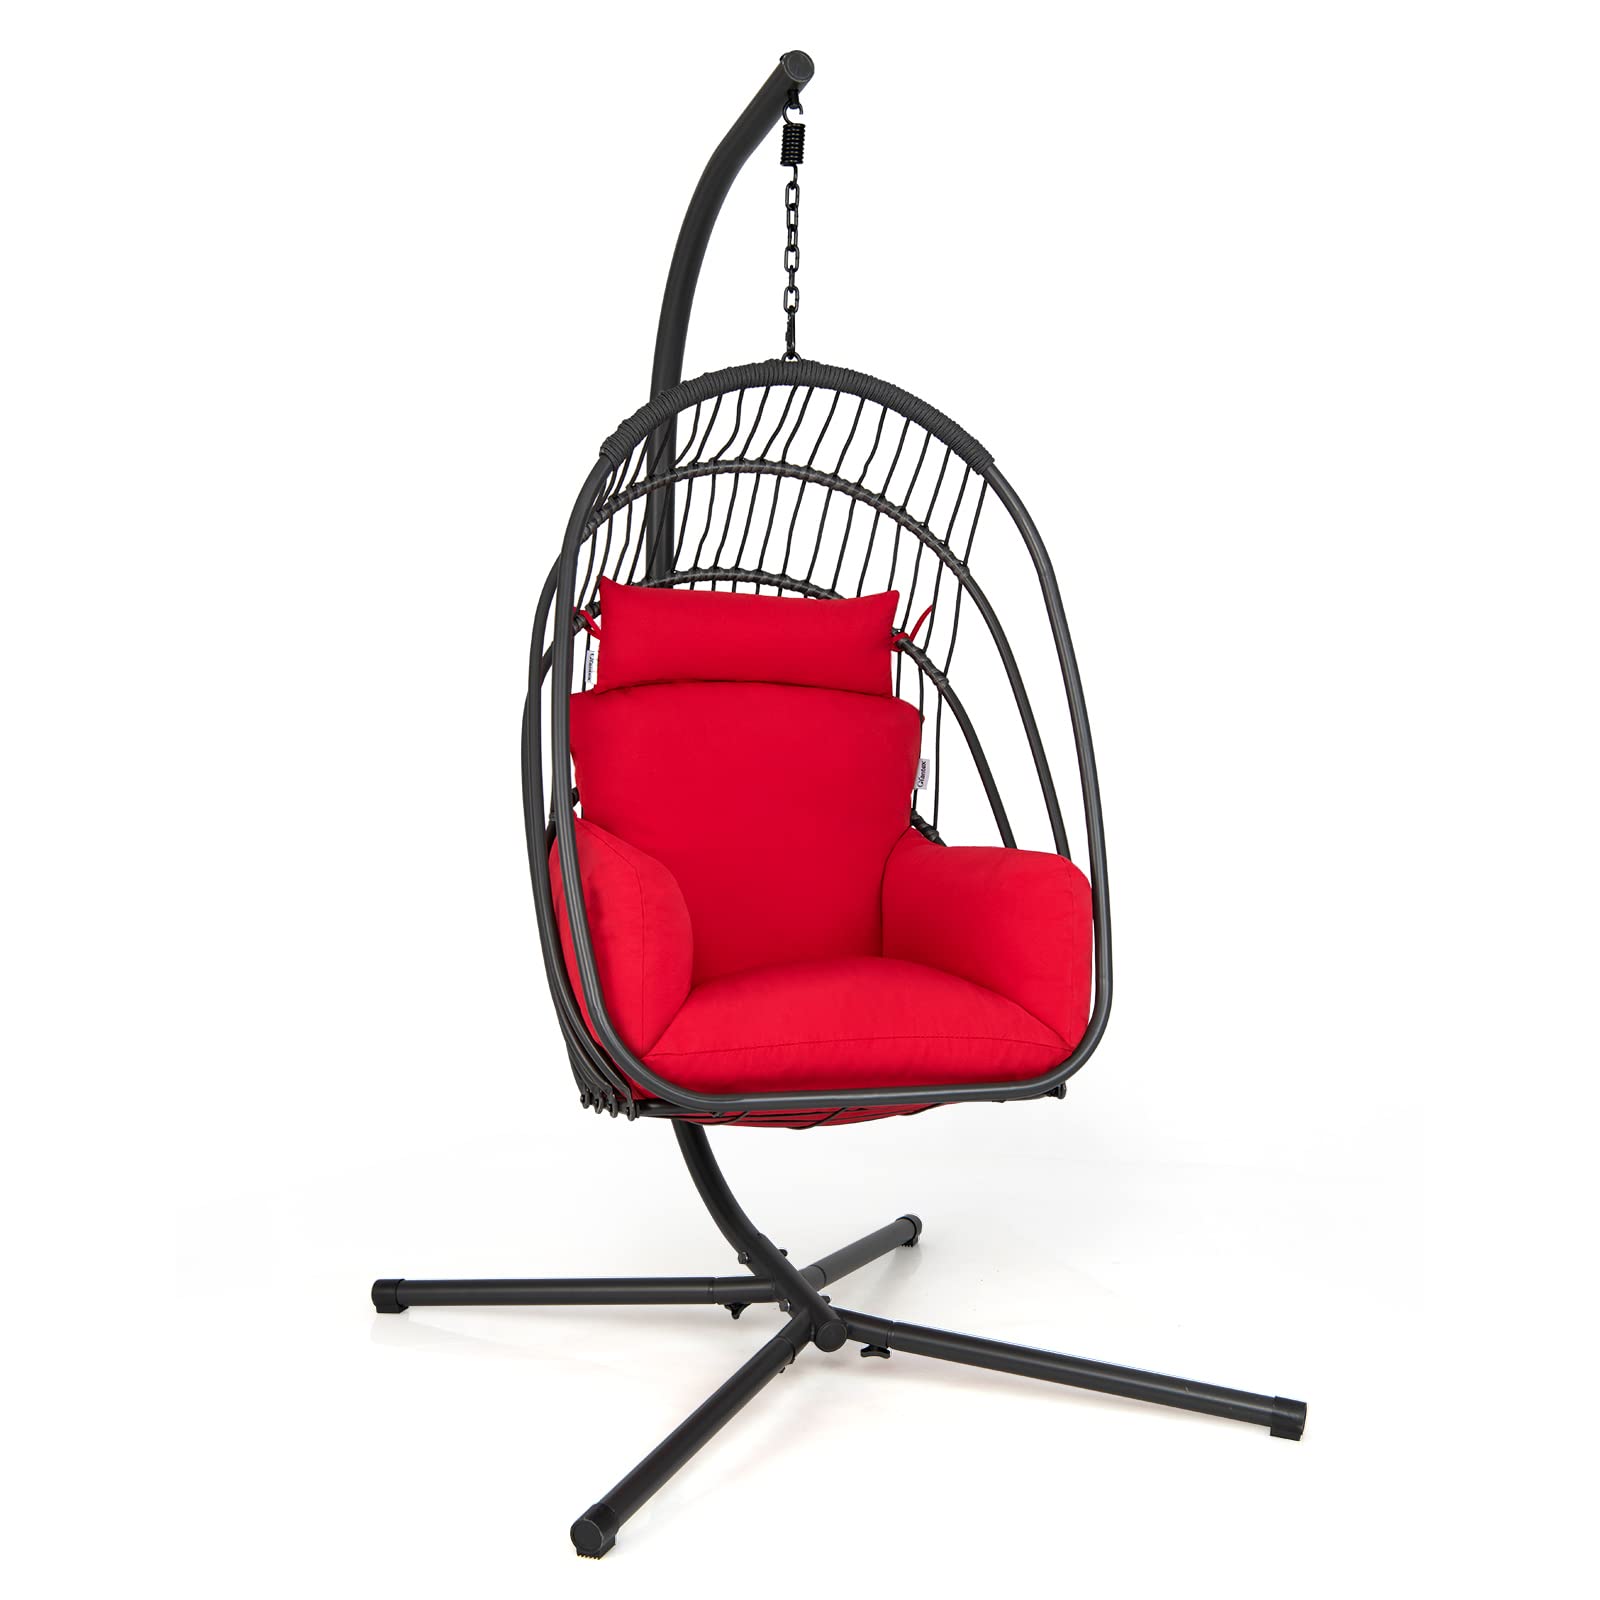 Giantex Egg Chair Hammock Stand - Hanging Swing with Stand